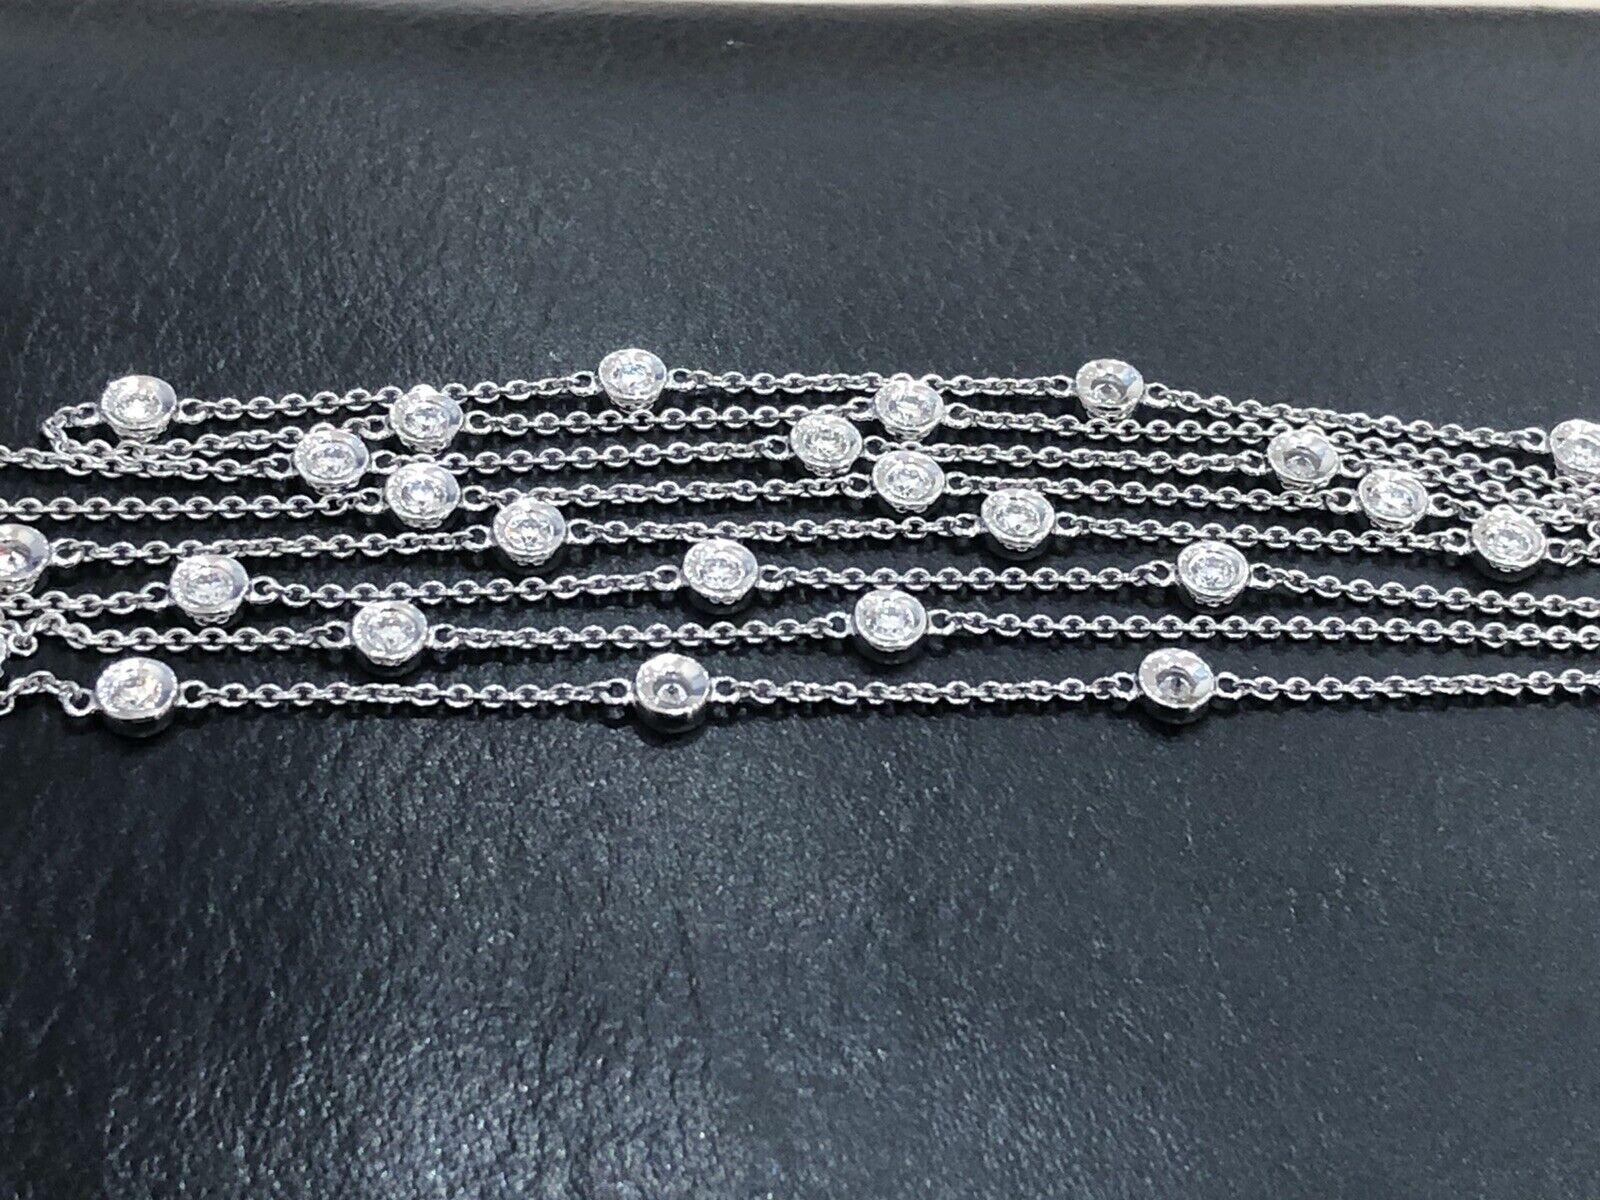 

High jewellery designer piece right from heart of London Hatton Garden

36 inch long chain fully embellished with SI+/VS clarity sparkling solitaire station diamonds totalling 2ct

It’s 36 inch long so can be worn as one long strand or double